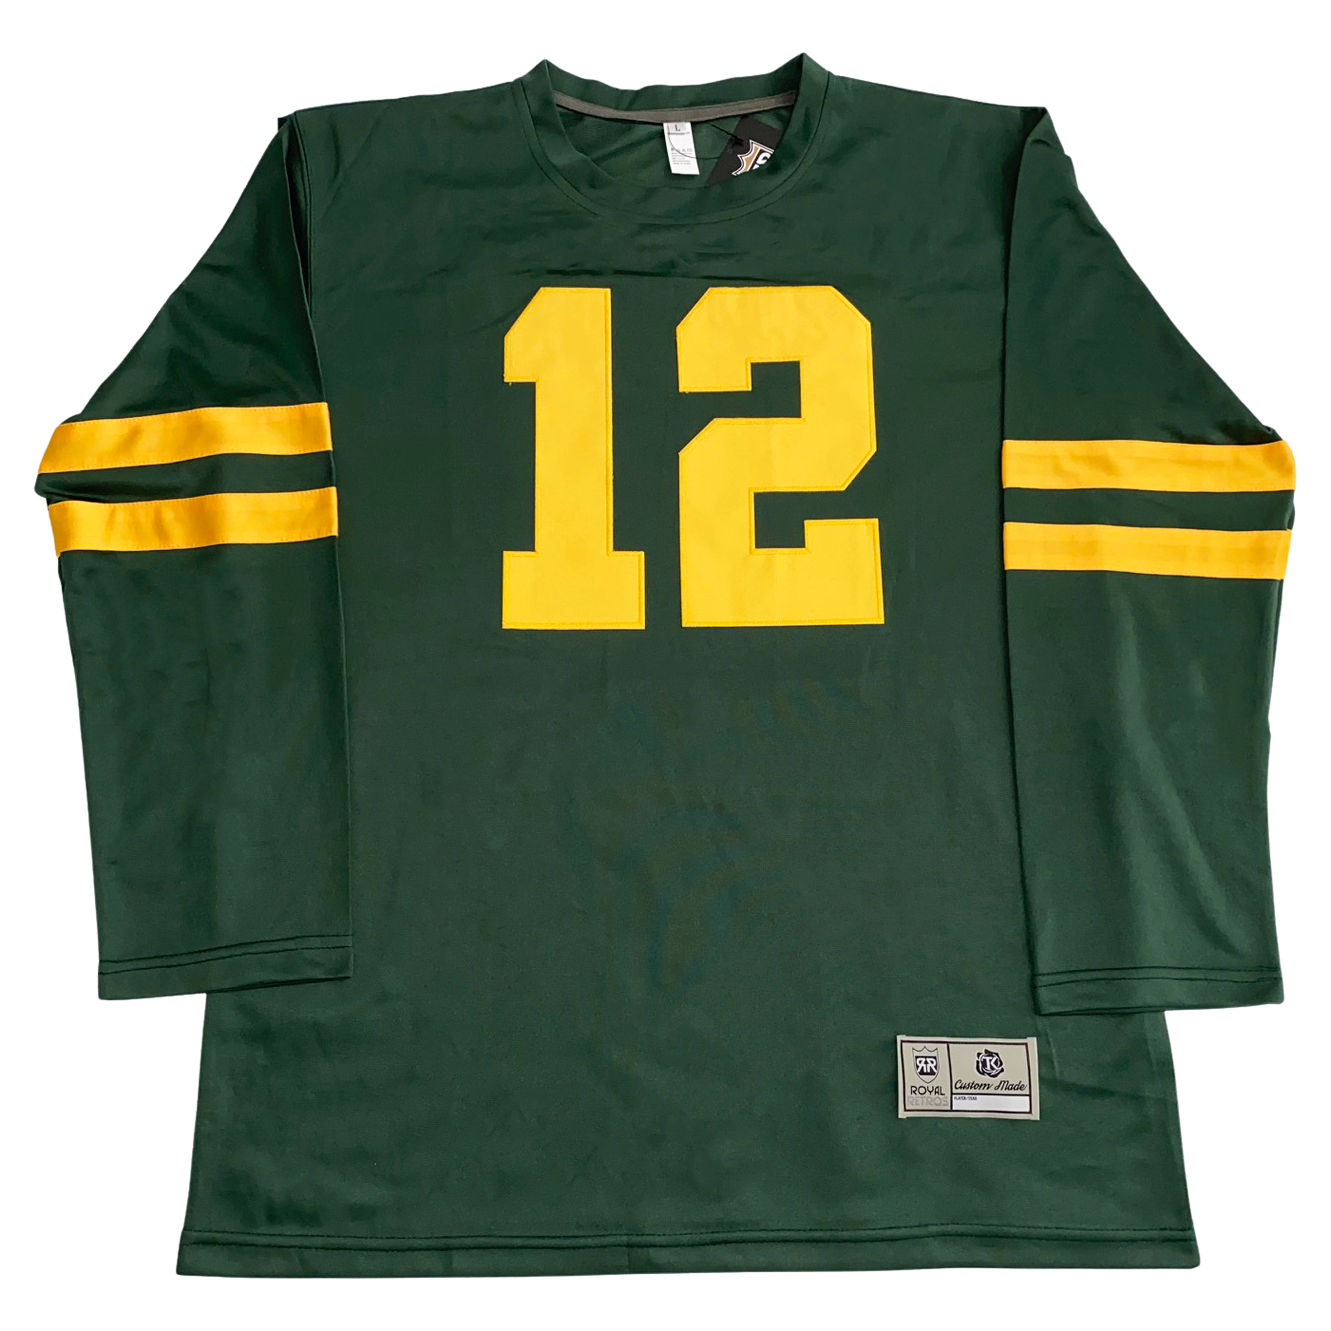 1950 green bay packers jersey